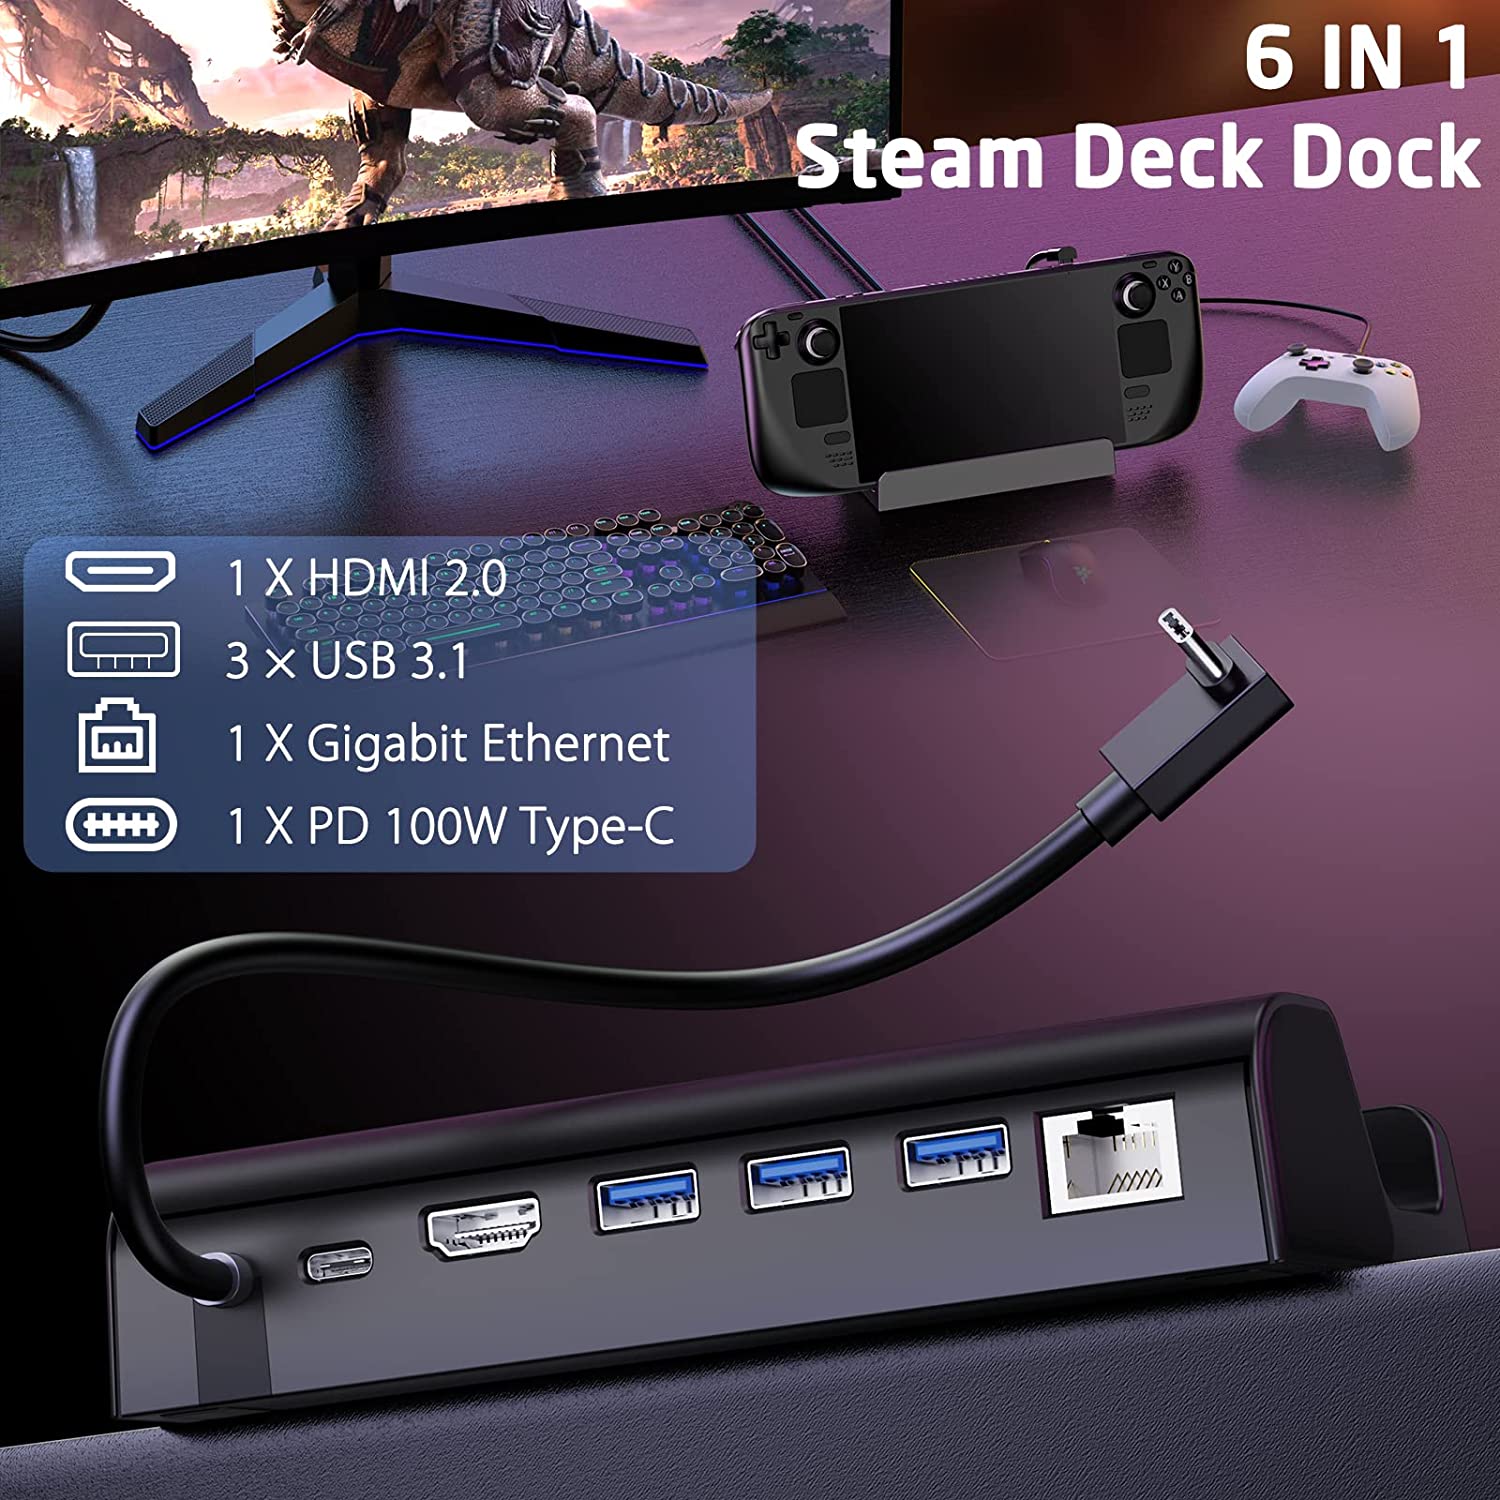 Steam Deck Dock With With Led Light, Docking Station With Pd 100w Port,  Hdmi 2.0 4k, Usb 2.0 Gigabit Ethernet For Steam Deck Accessories